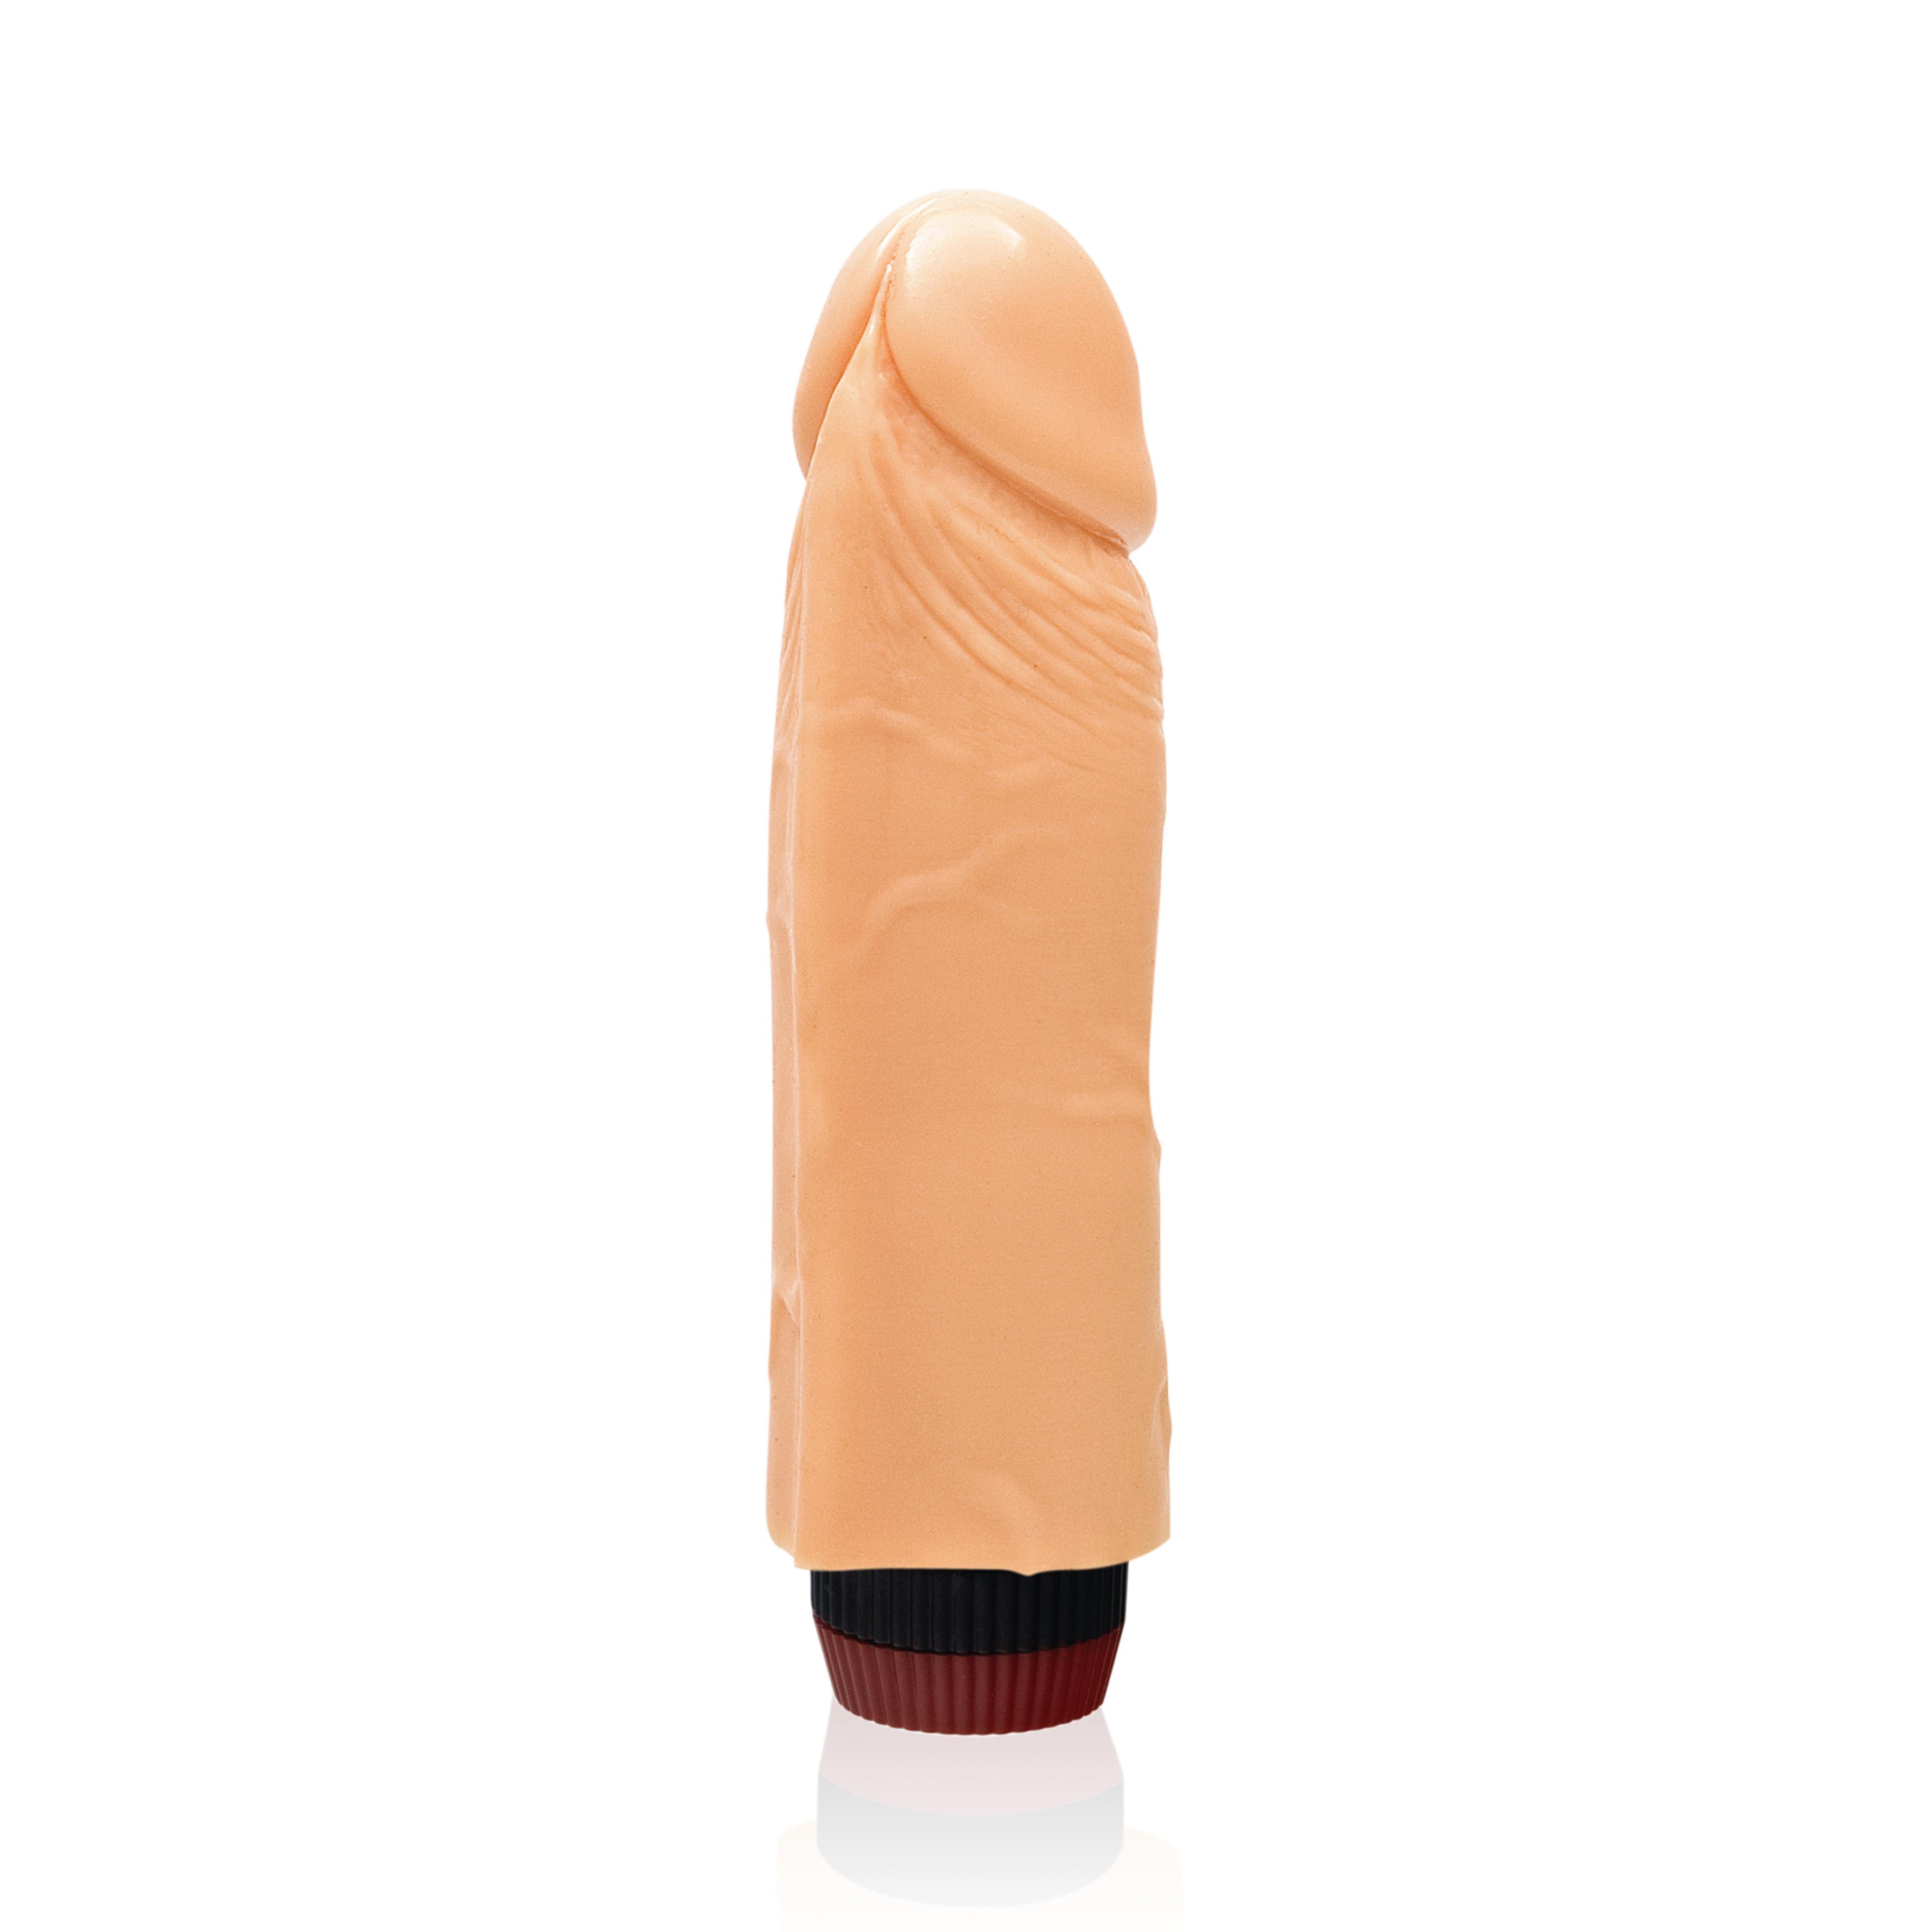 SI IGNITE Cock Dong with Vibration, Flesh, 18 cm